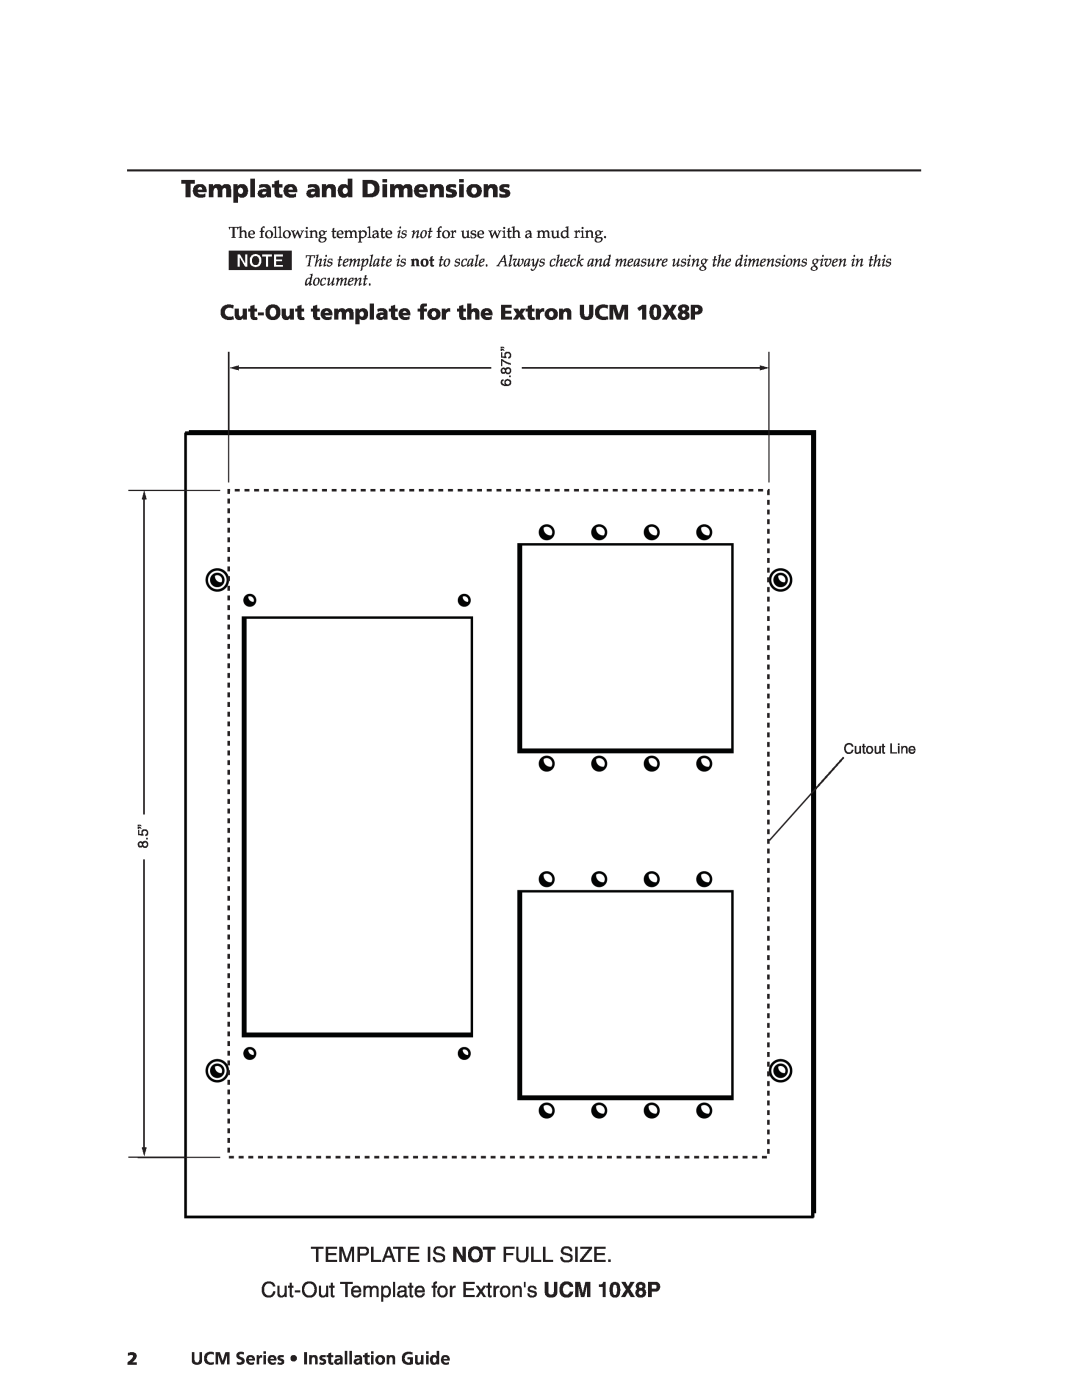 Extron electronic UCM-10X8P, UCM-RAAP  UCM Series Installation Guide, Template and Dimensions, 6.875”, 8.5”, Cutout Line 